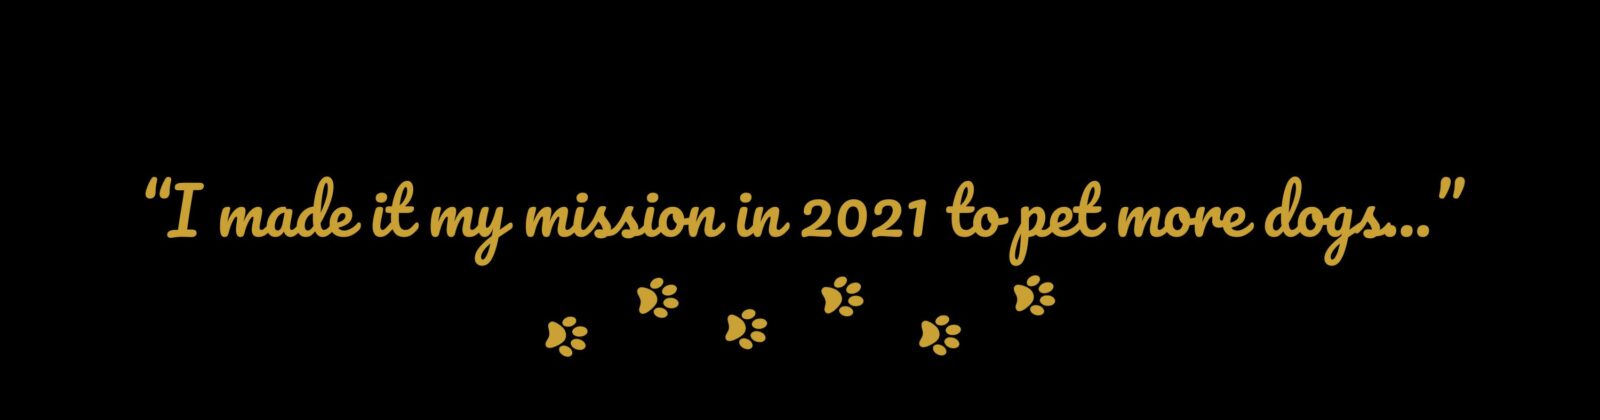 “I made it my mission in 2021 to pet more dogs...”